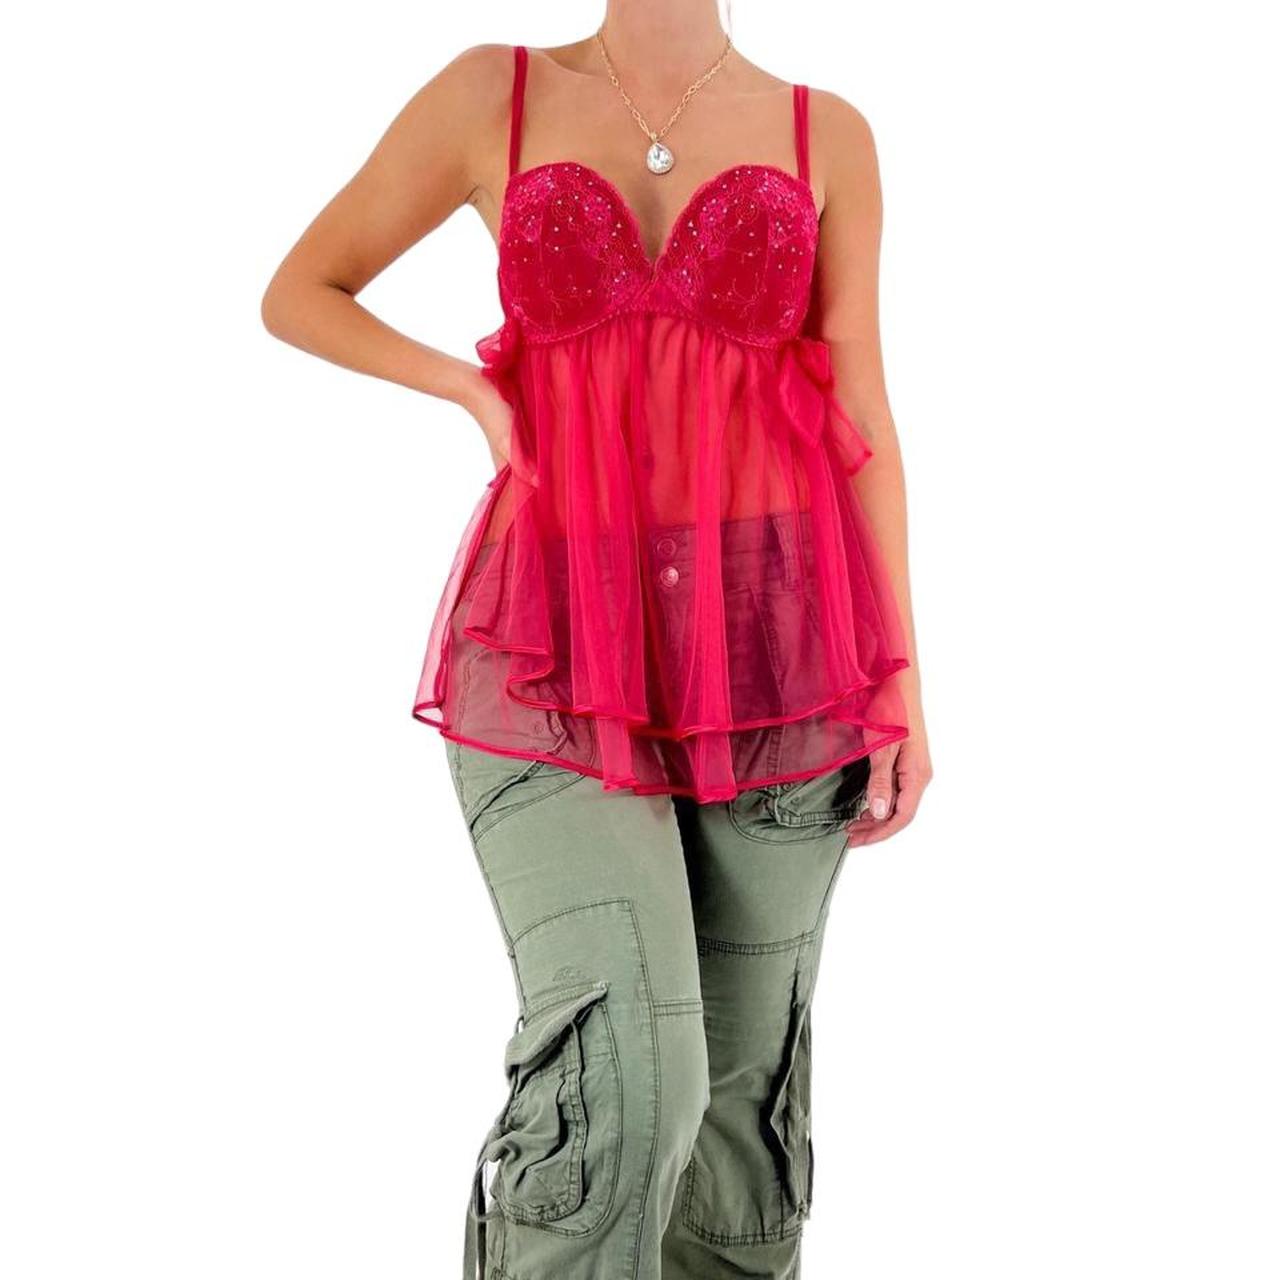 Y2k Vintage Victoria's Secret Red Sheer Spaghetti Strap Top w/ Floral Lace + Glitter Details [Medium D-Cup]